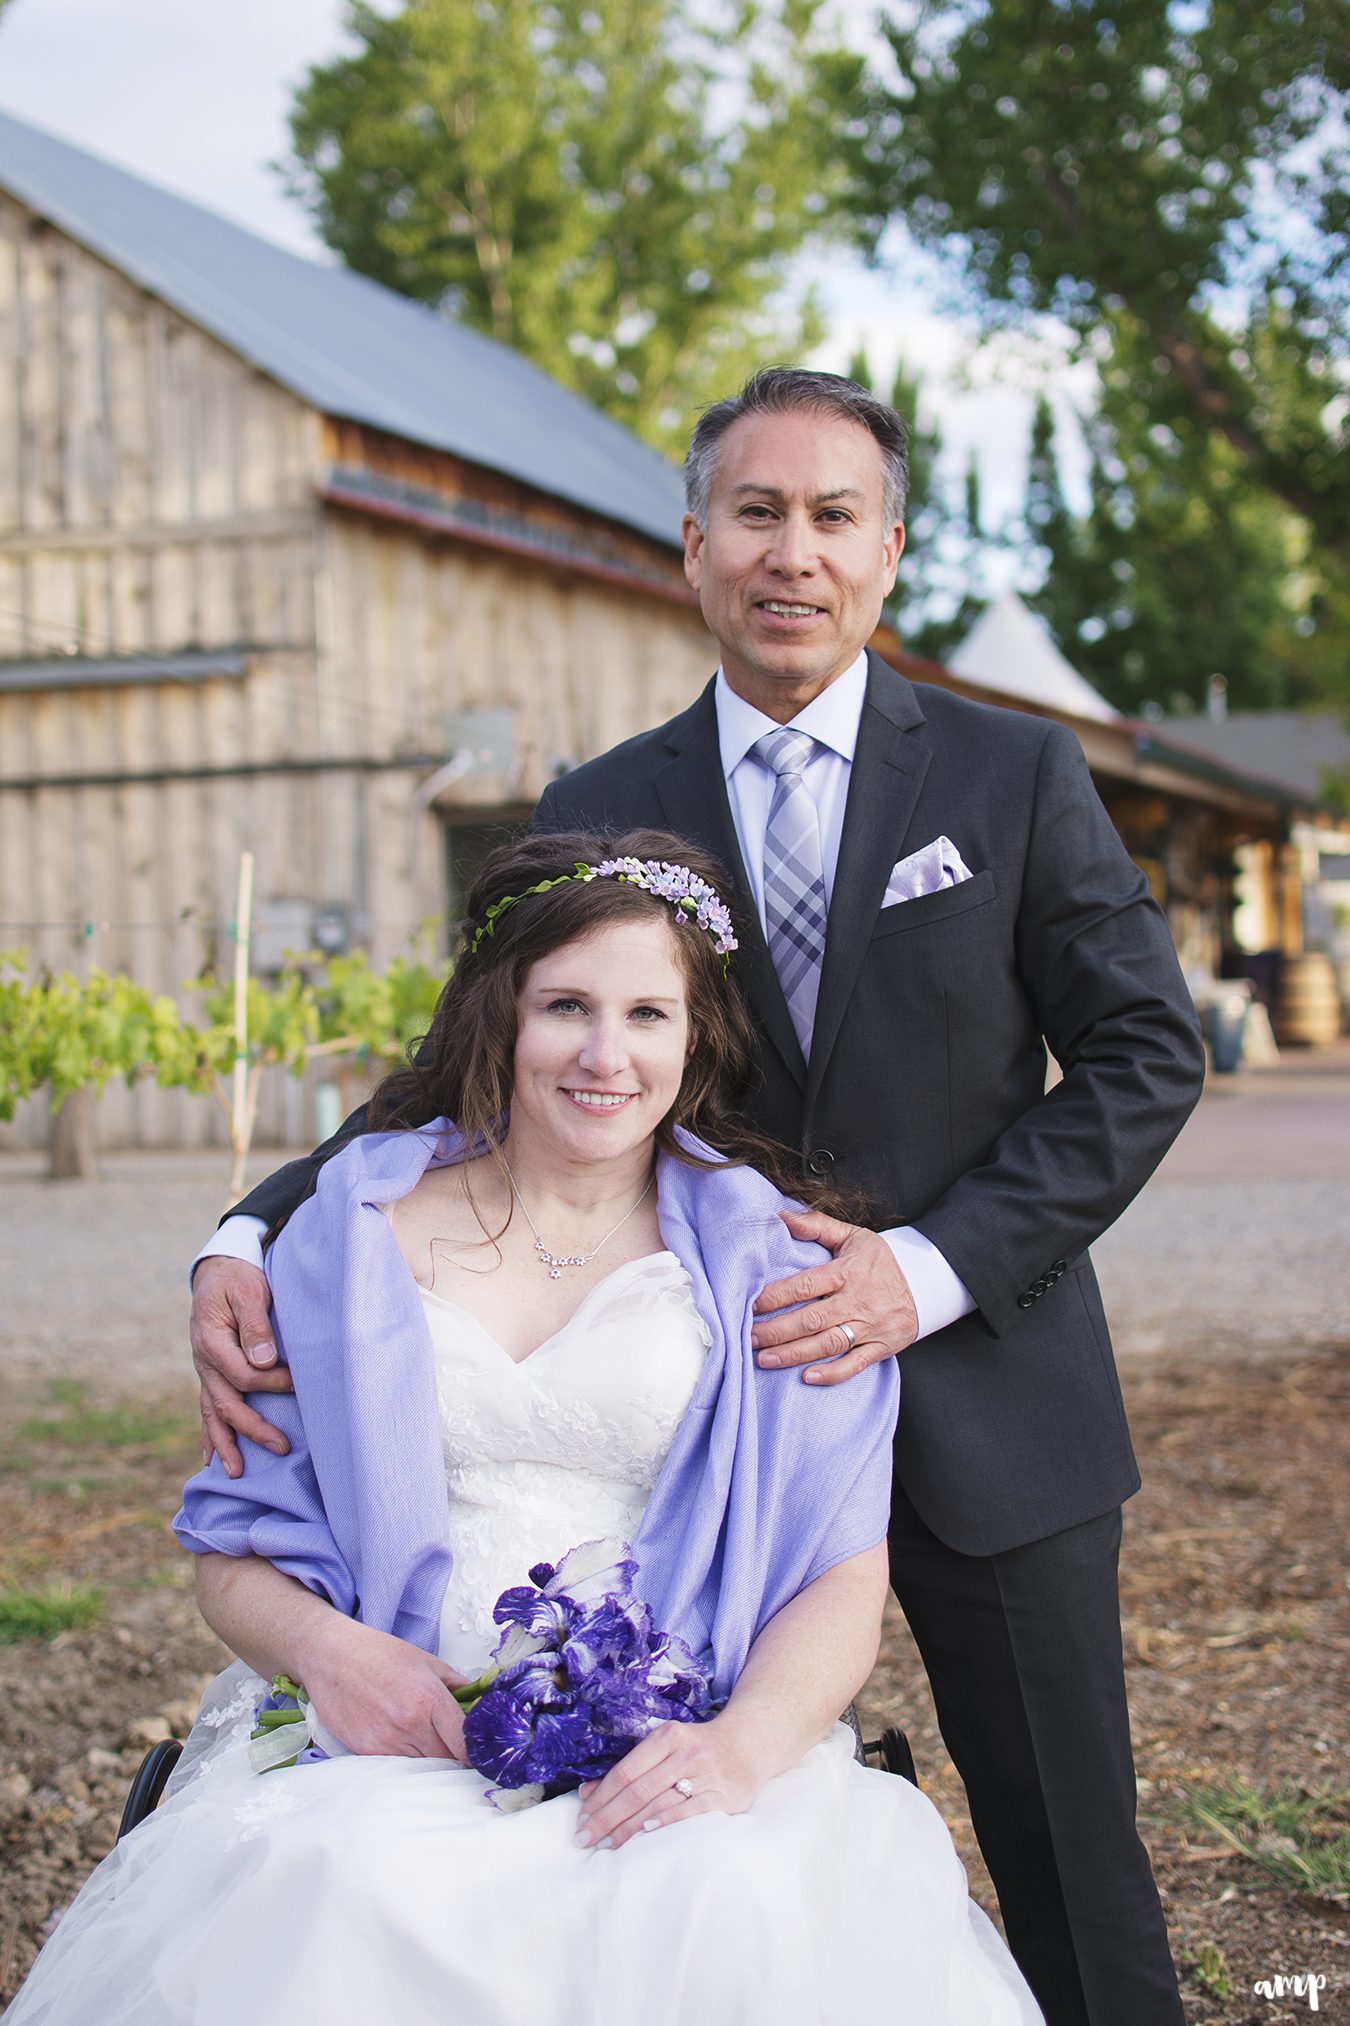 Newlywed couple with bride in wheel chair outside a winery